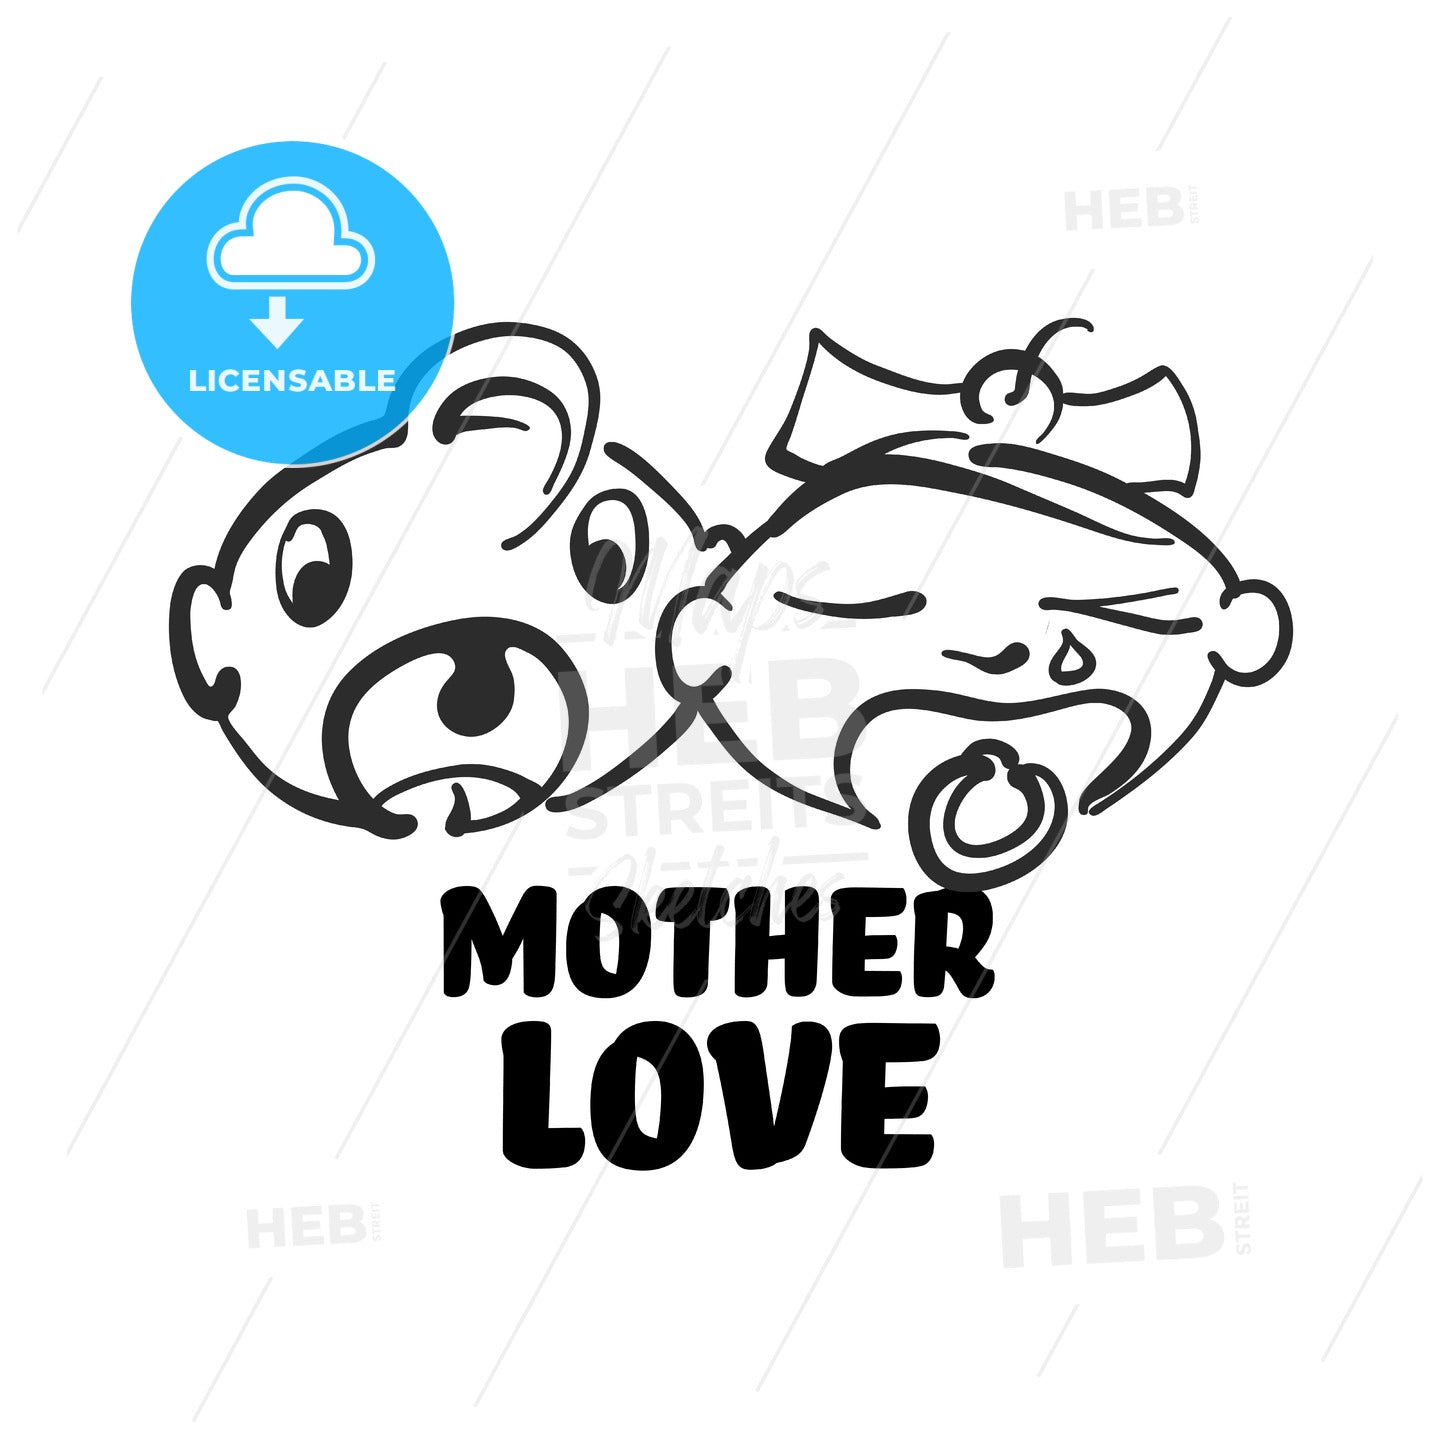 Mother love icon – instant download